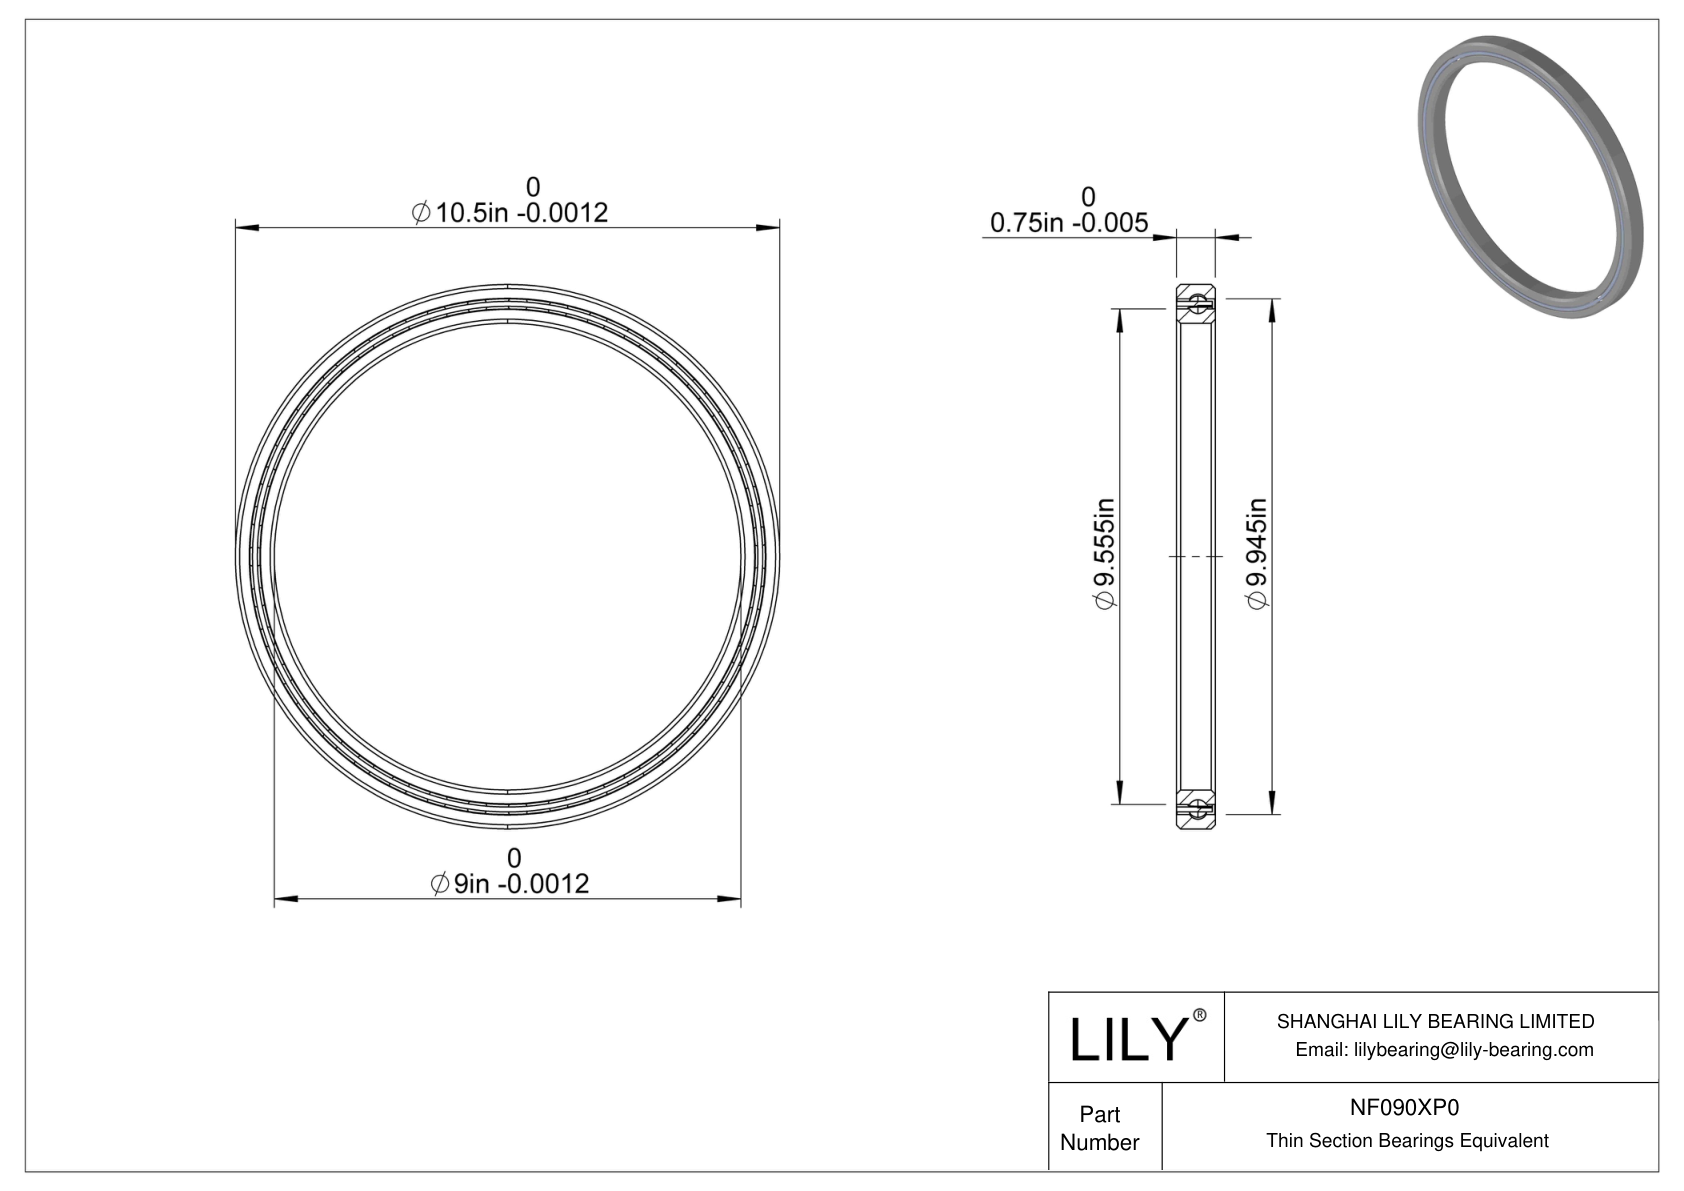 NF090XP0 Constant Section (CS) Bearings cad drawing